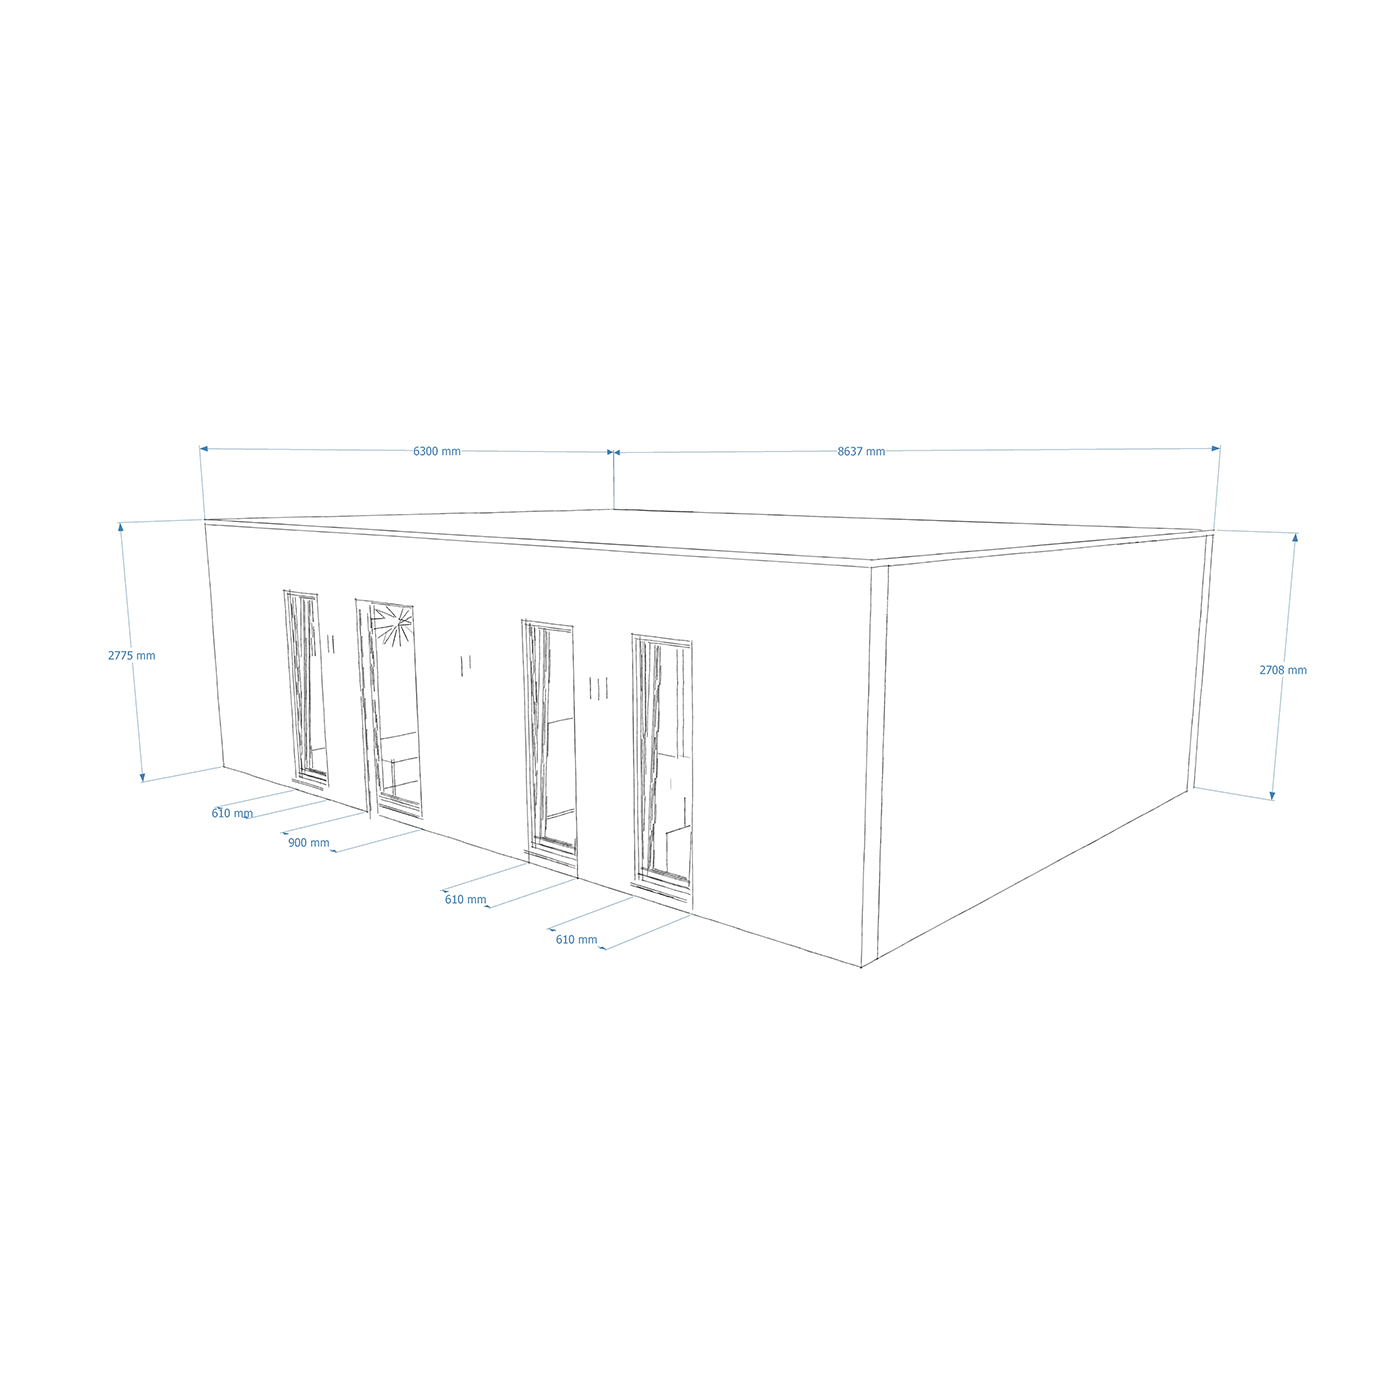 Exterior dimensions for 6.2m by 8.6m mobile home